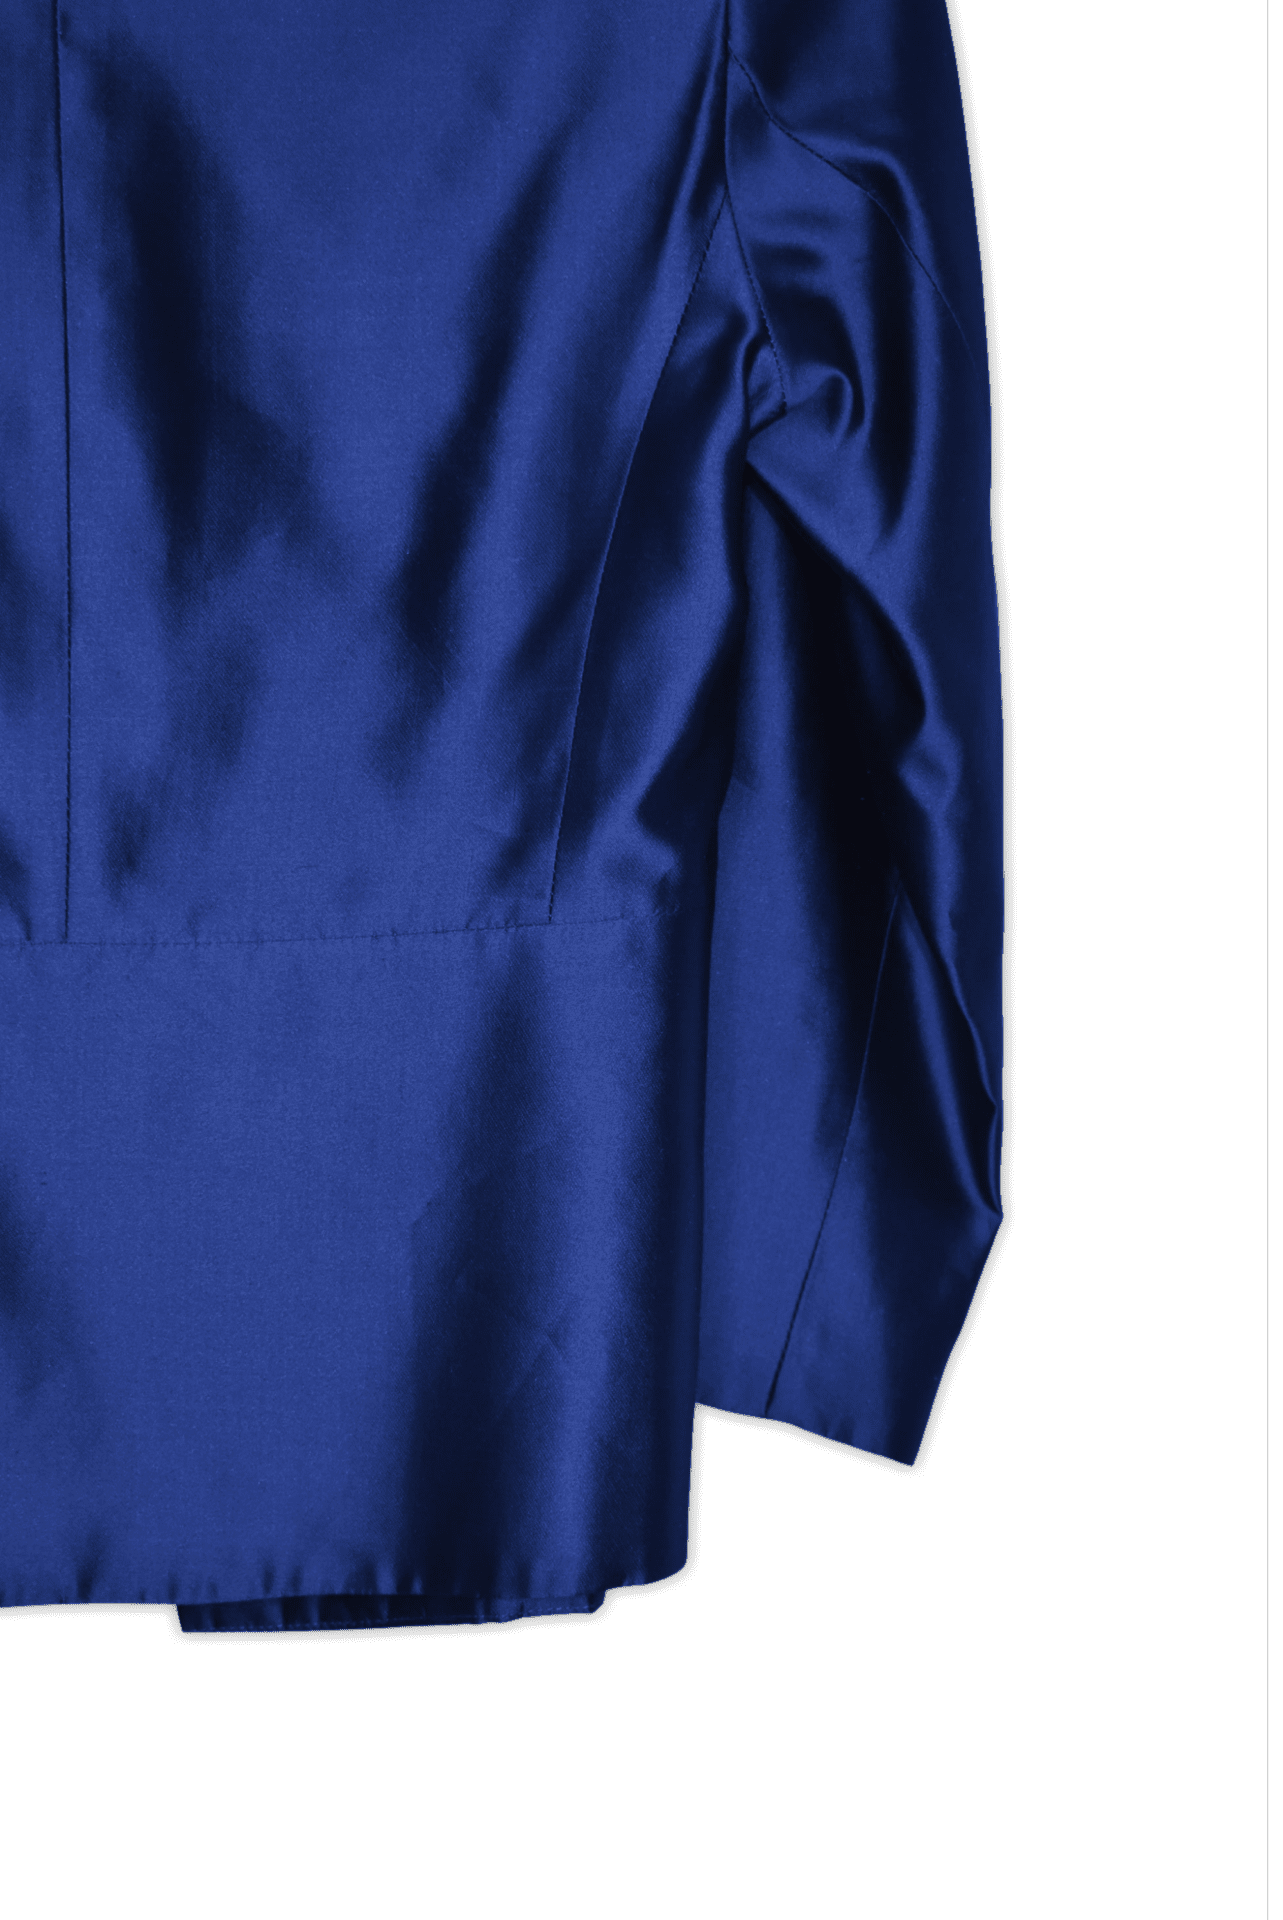 Formal blazer featuring a peplum flare hem and two front buttons. Made in Australia. Small, royal blue